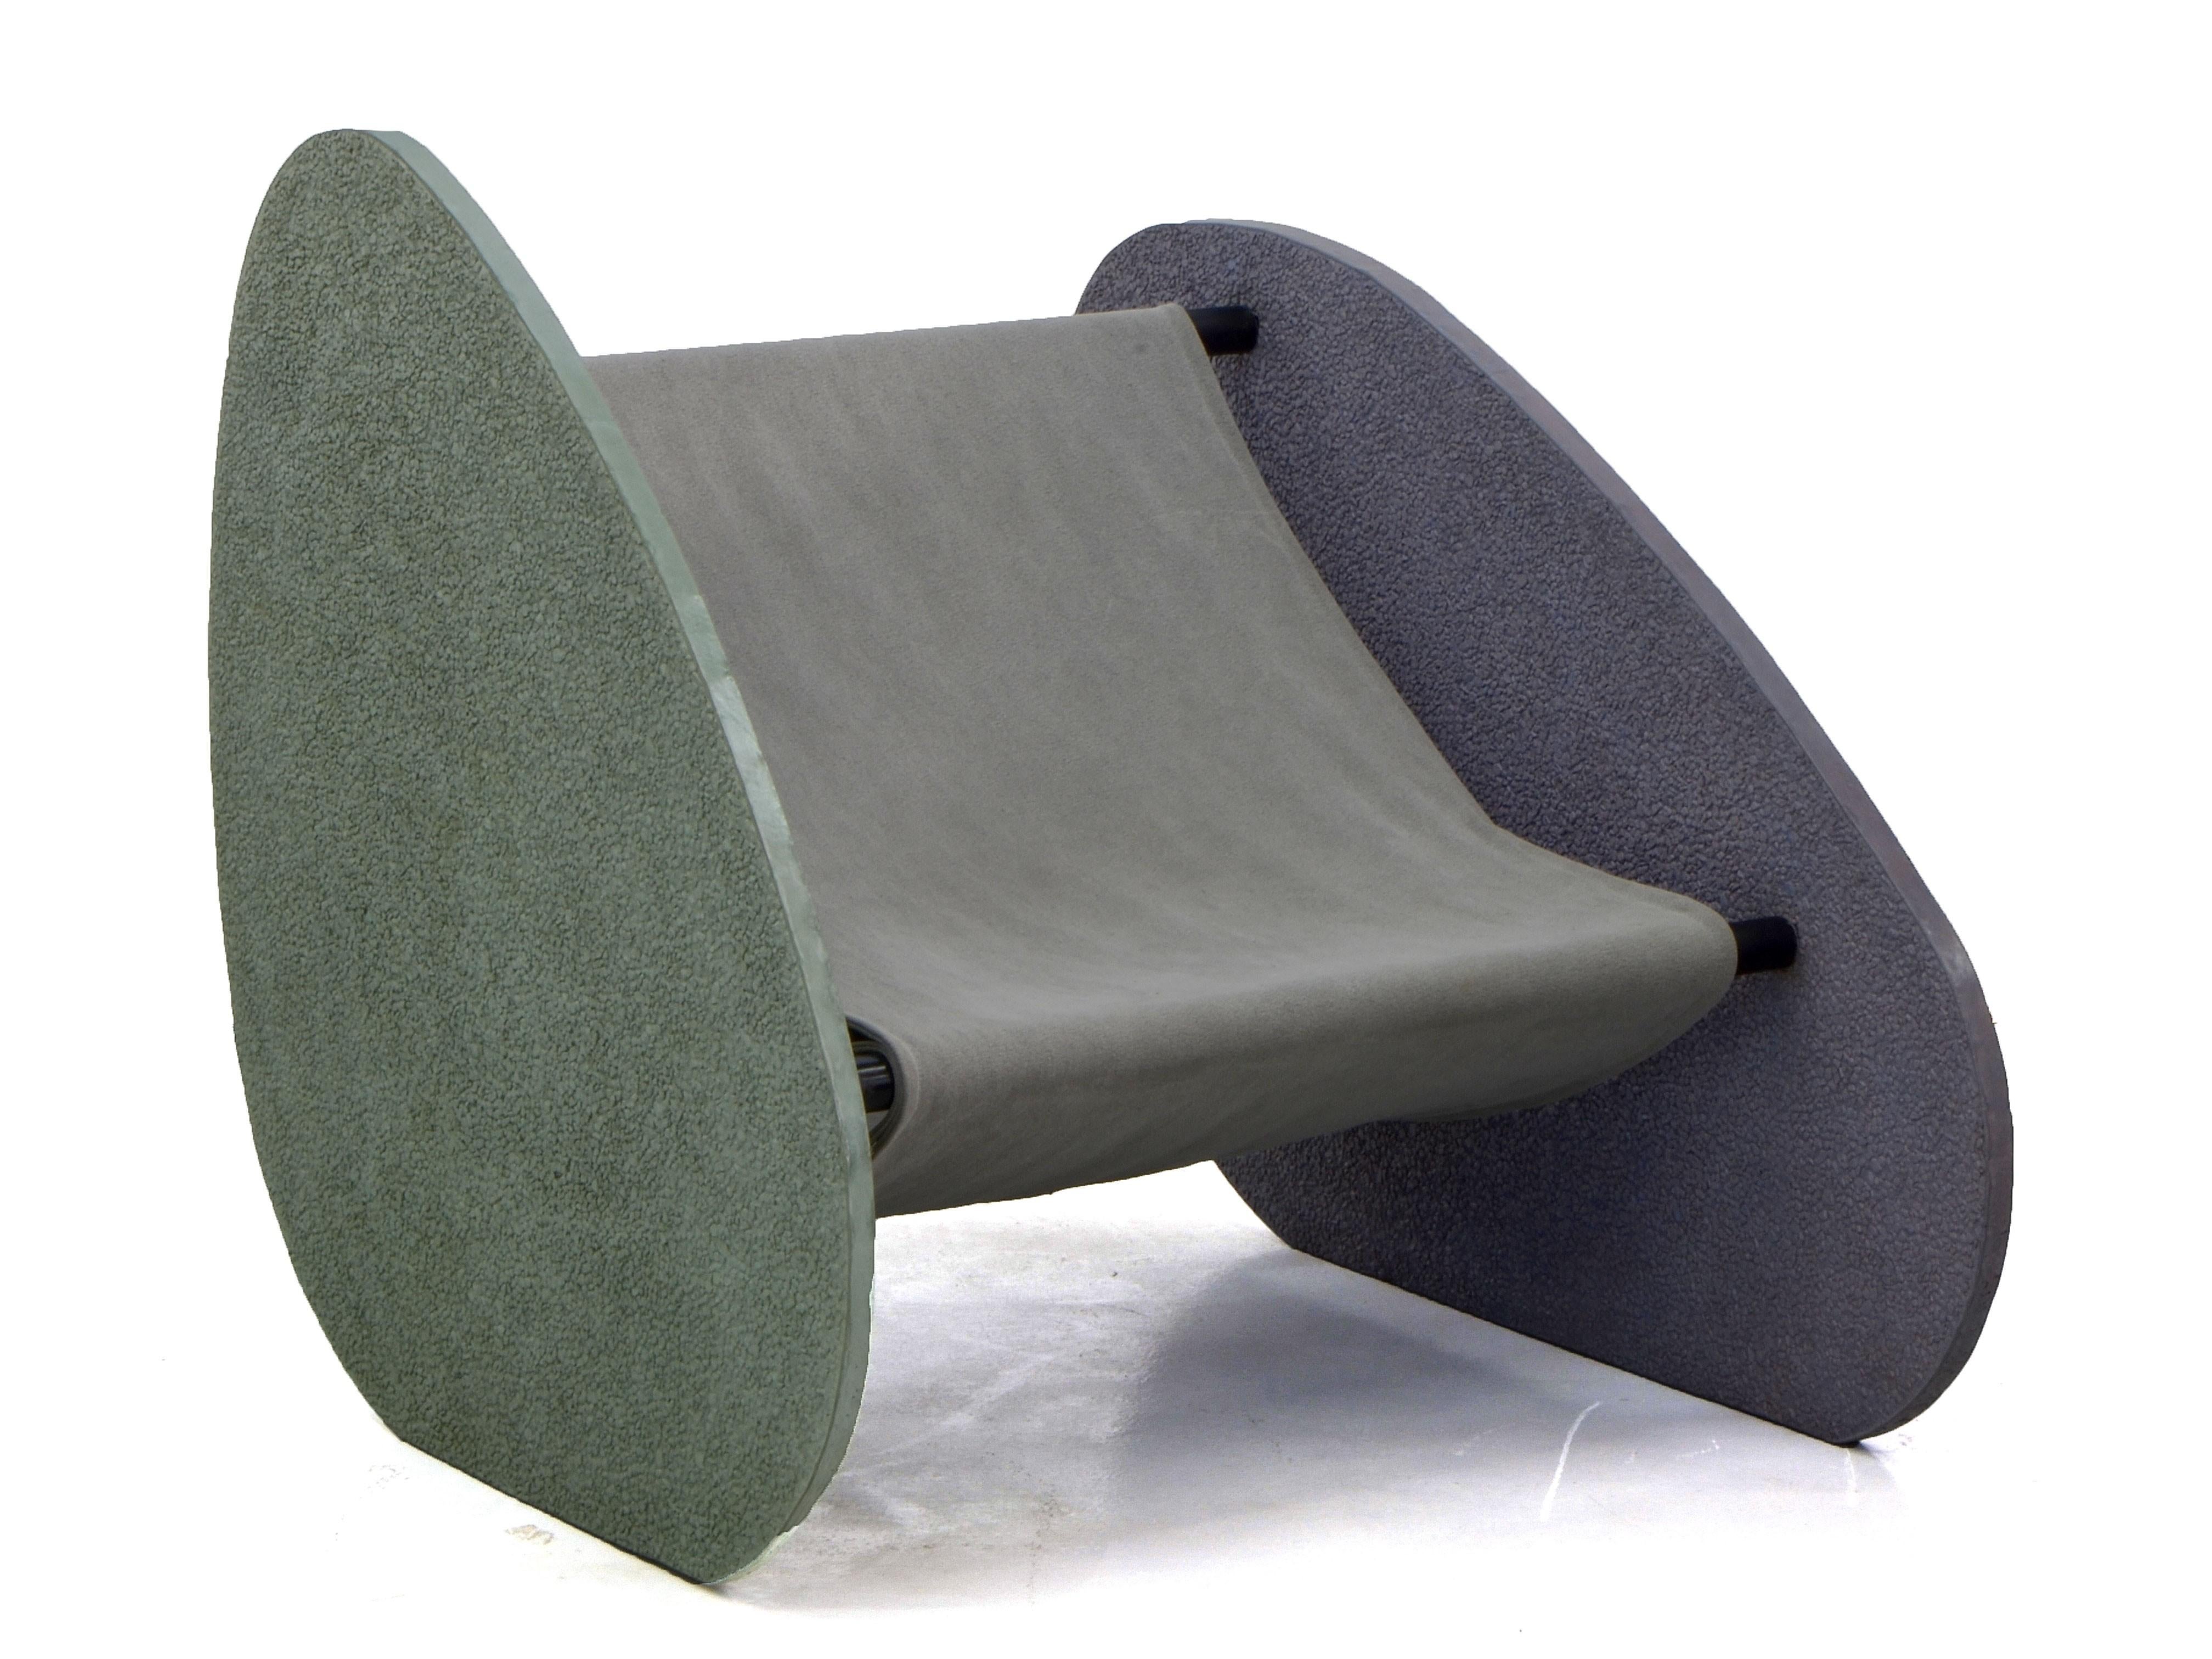 The design of the Pétrea armchair pays a tribute to the Mid-Century Modern tradition of Brazilian architecture by the alluding to one of its most use materials, namely concrete. But now, it is the ductal and the synthetic polymer, more malleable and